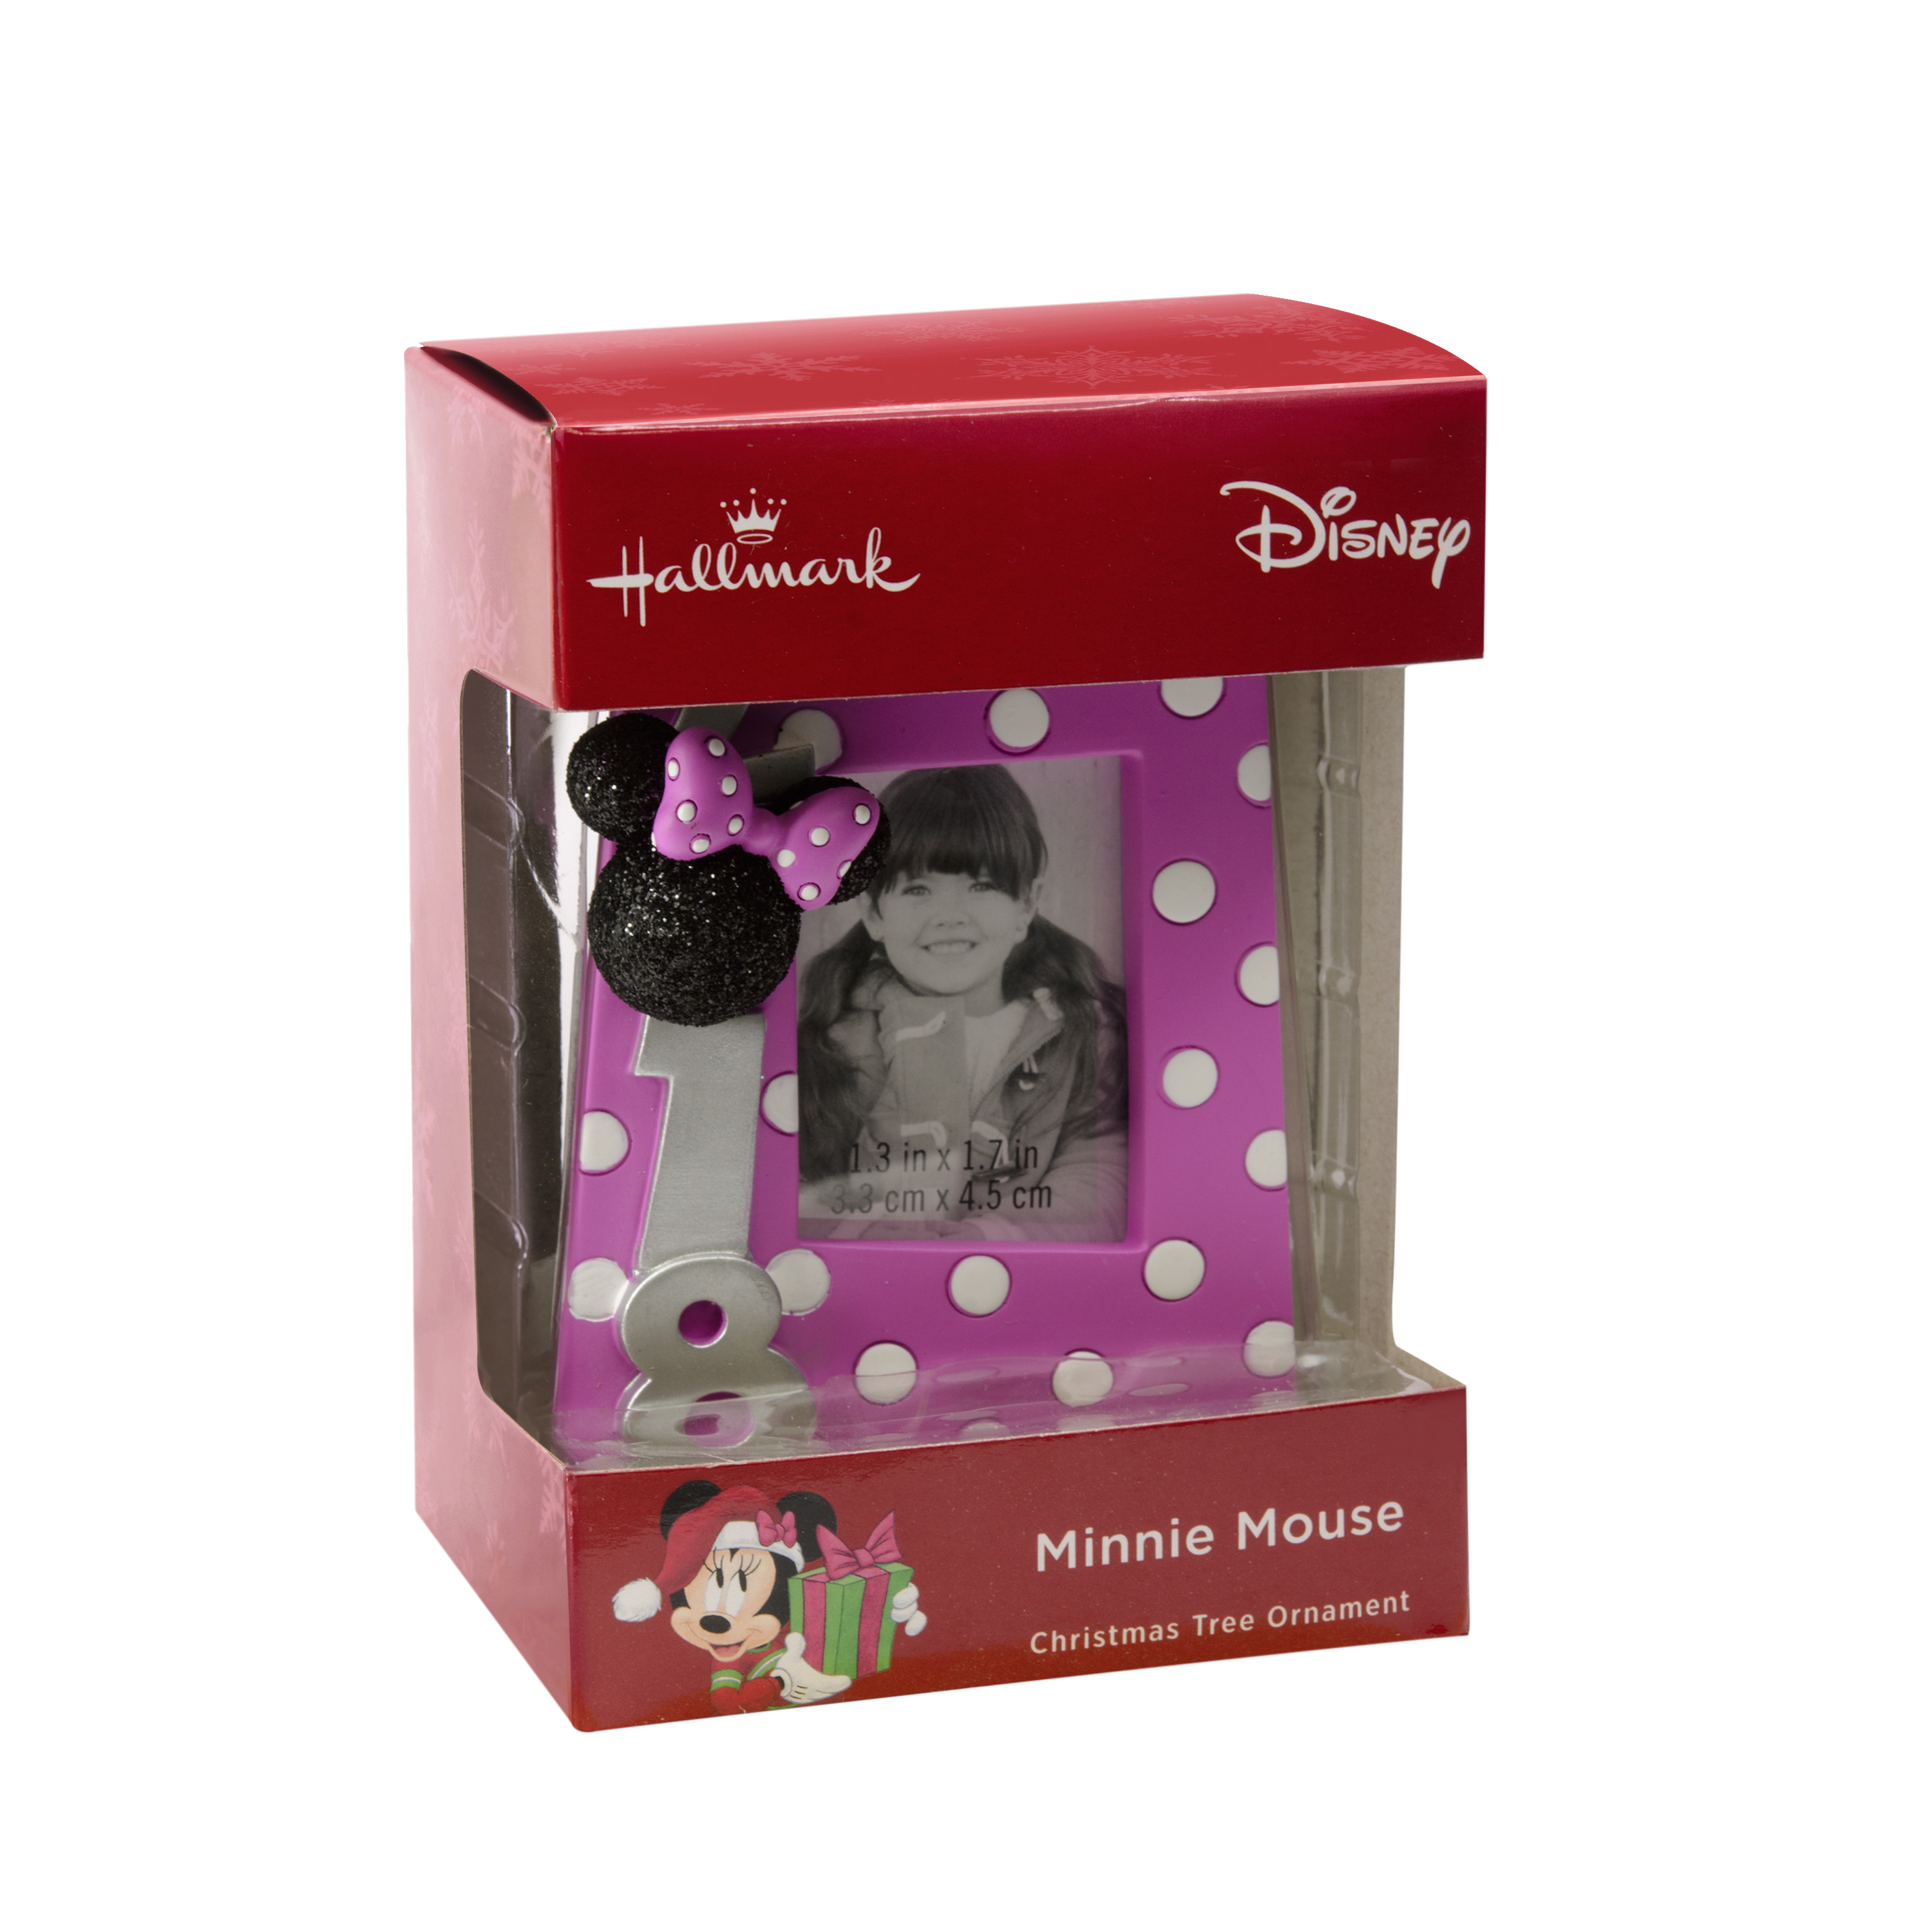 Hallmark Disney Minnie Mouse 2018 Picture Frame Christmas Ornament - image 5 of 5